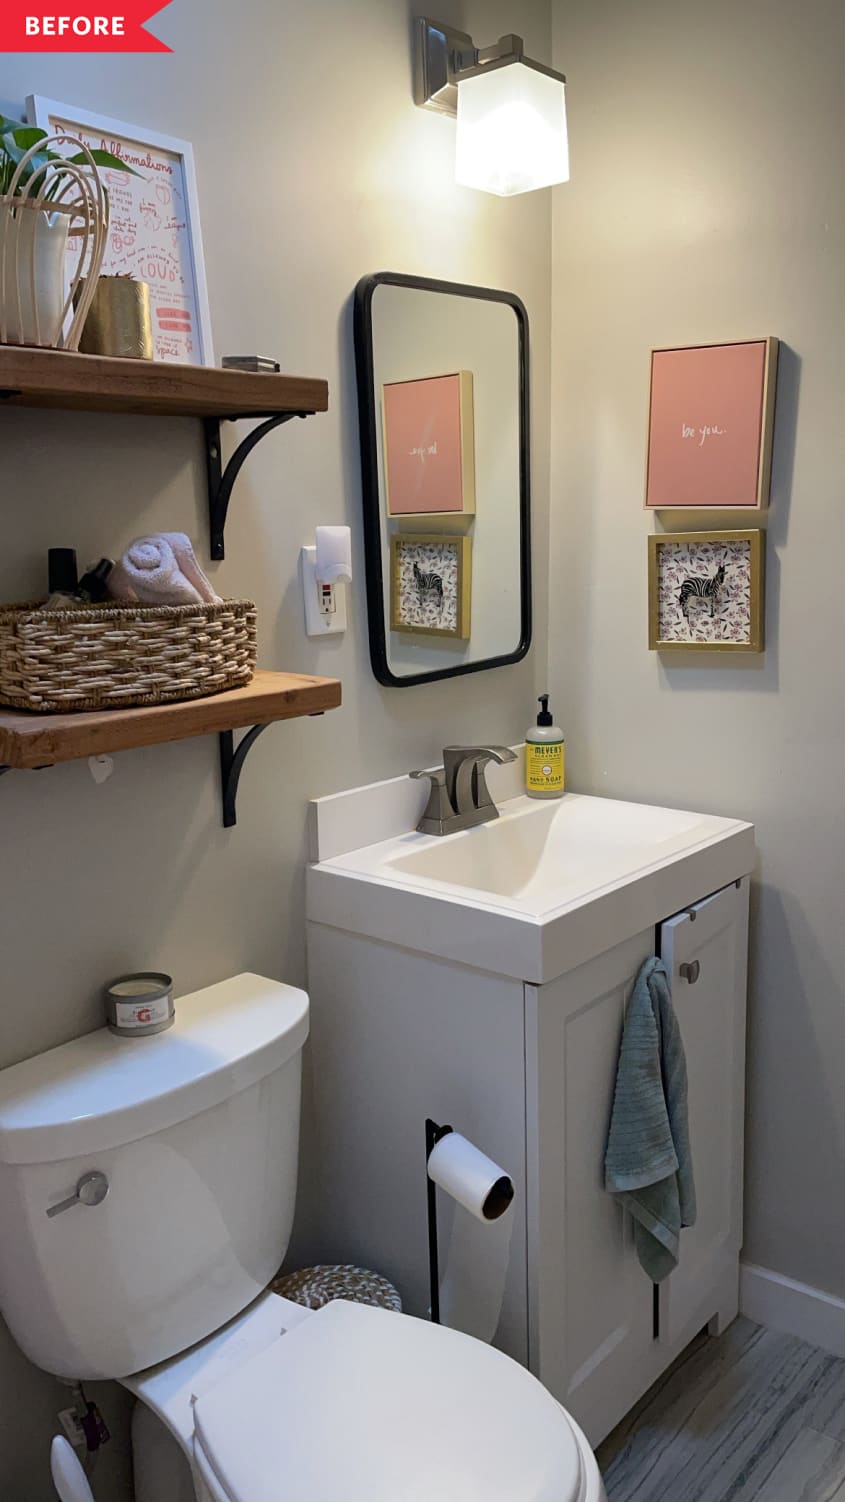 Before: Bathroom with beige walls and white vanity